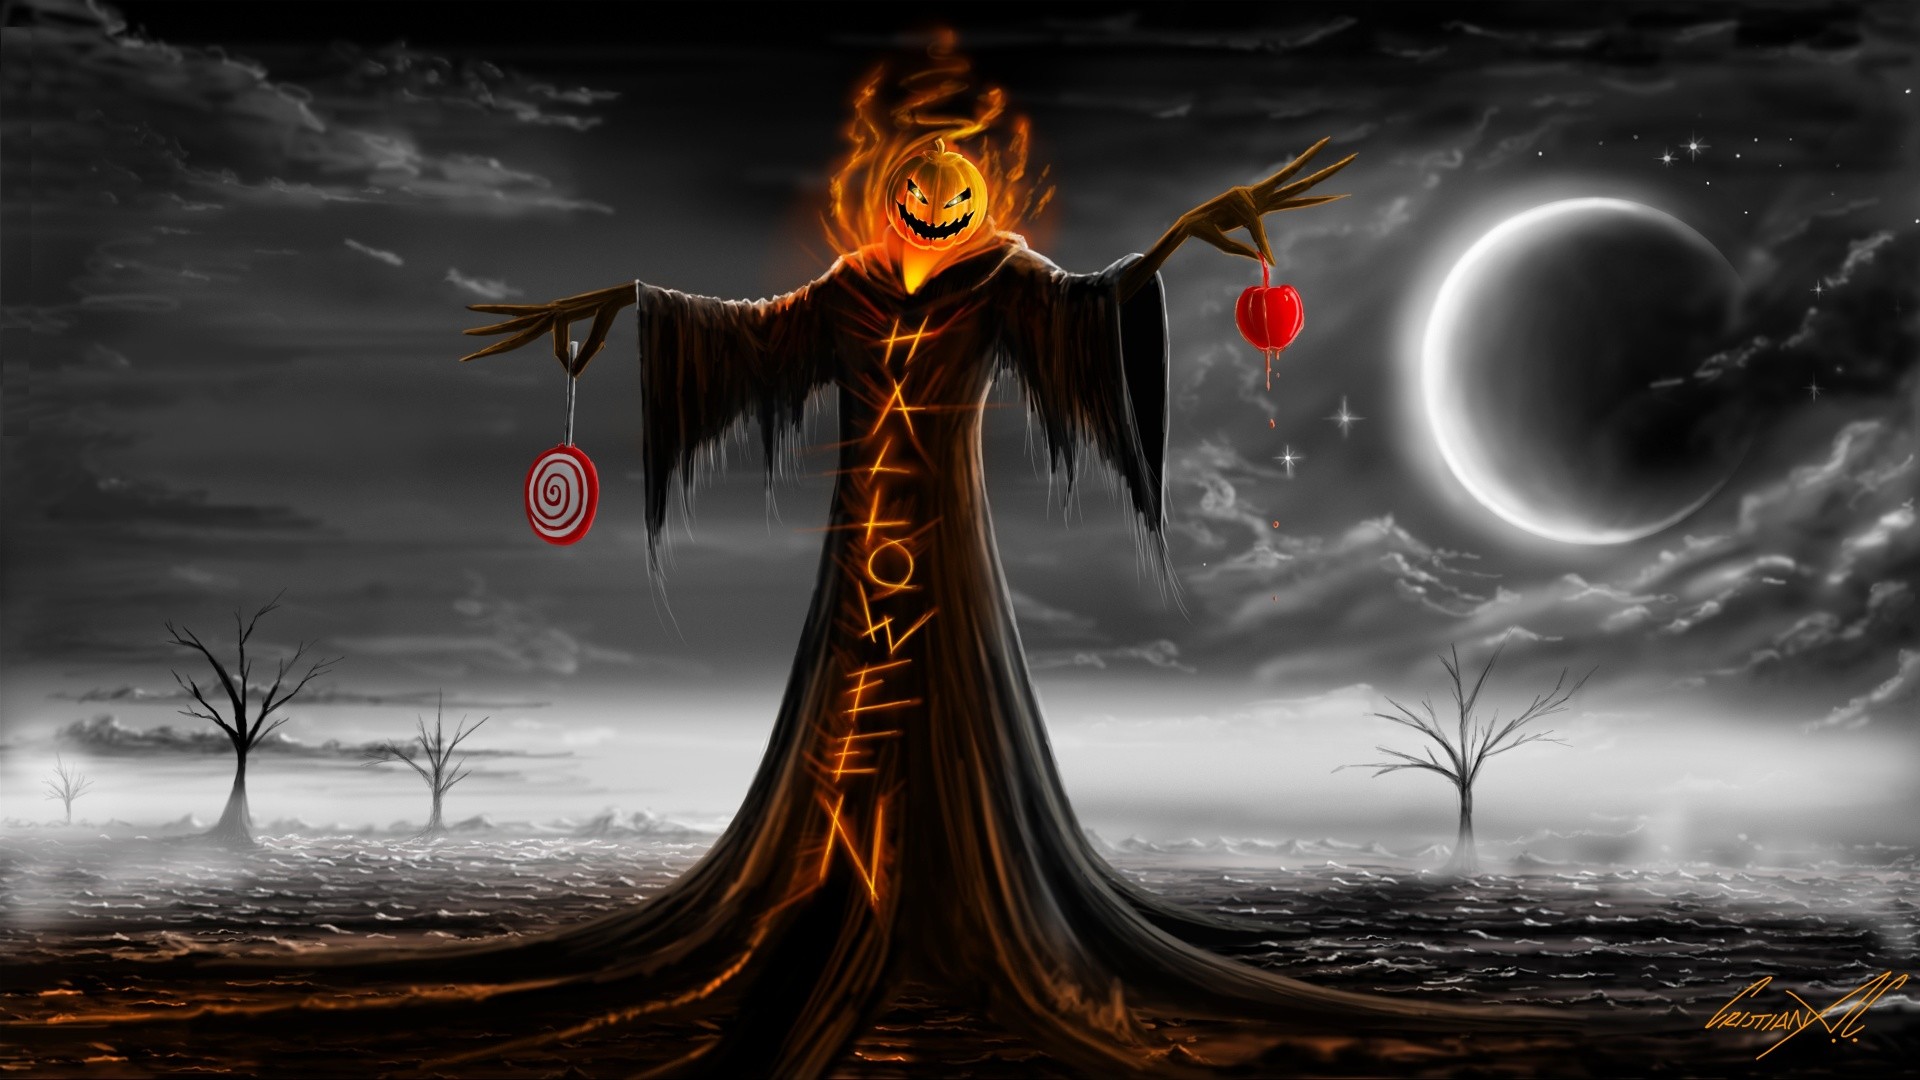 1920x1080 Halloween Backgrounds full HD Free Download for Desktop Laptop PC